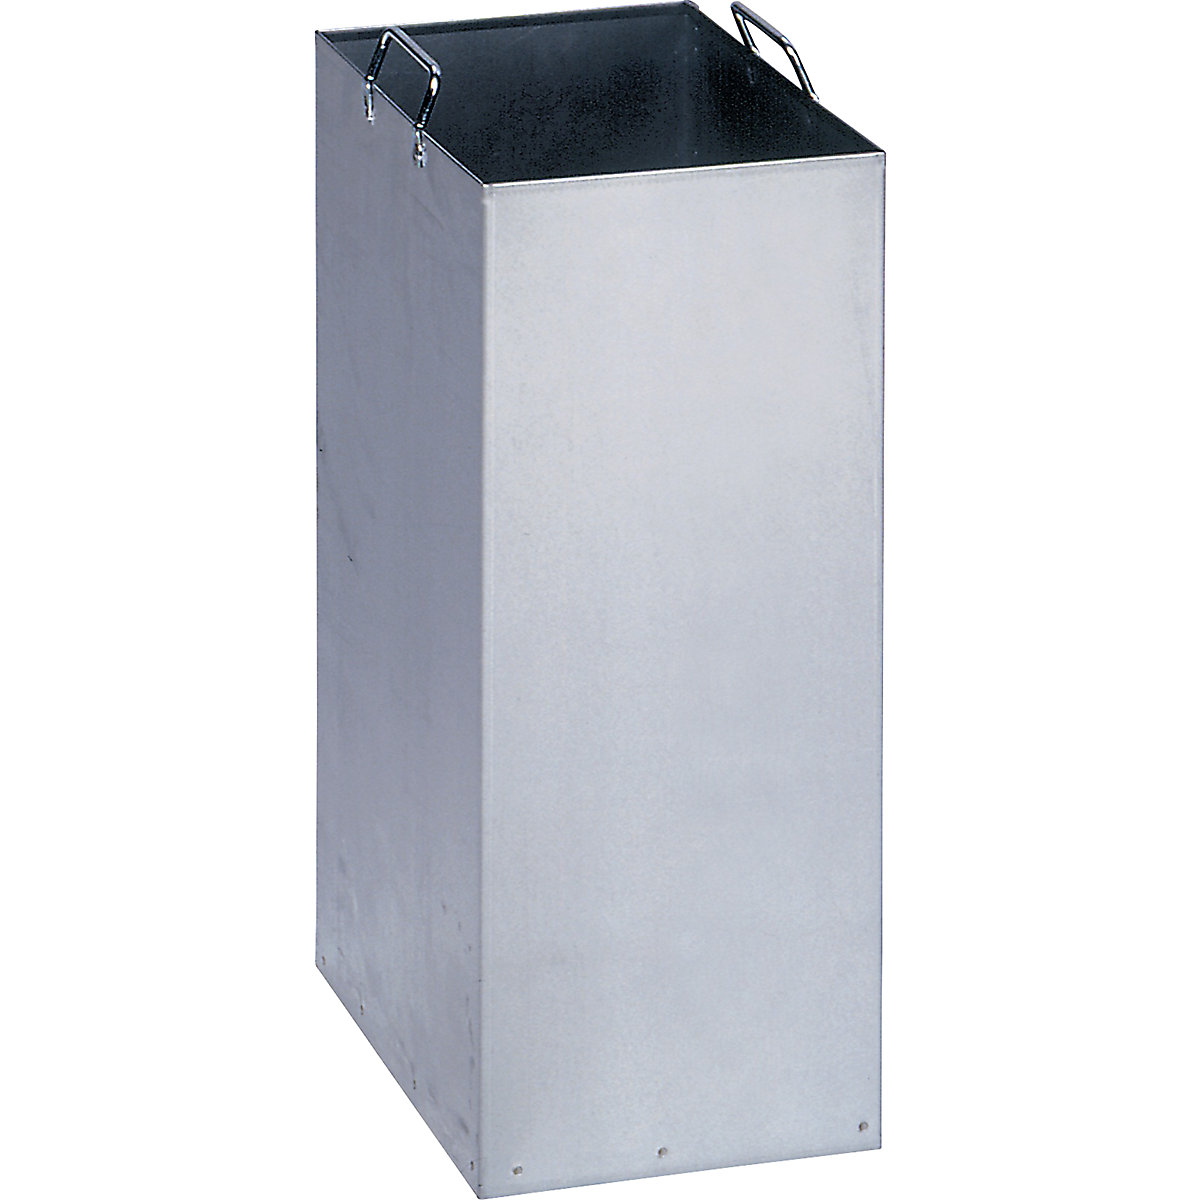 Inner container for recyclable waste collection containers - VAR